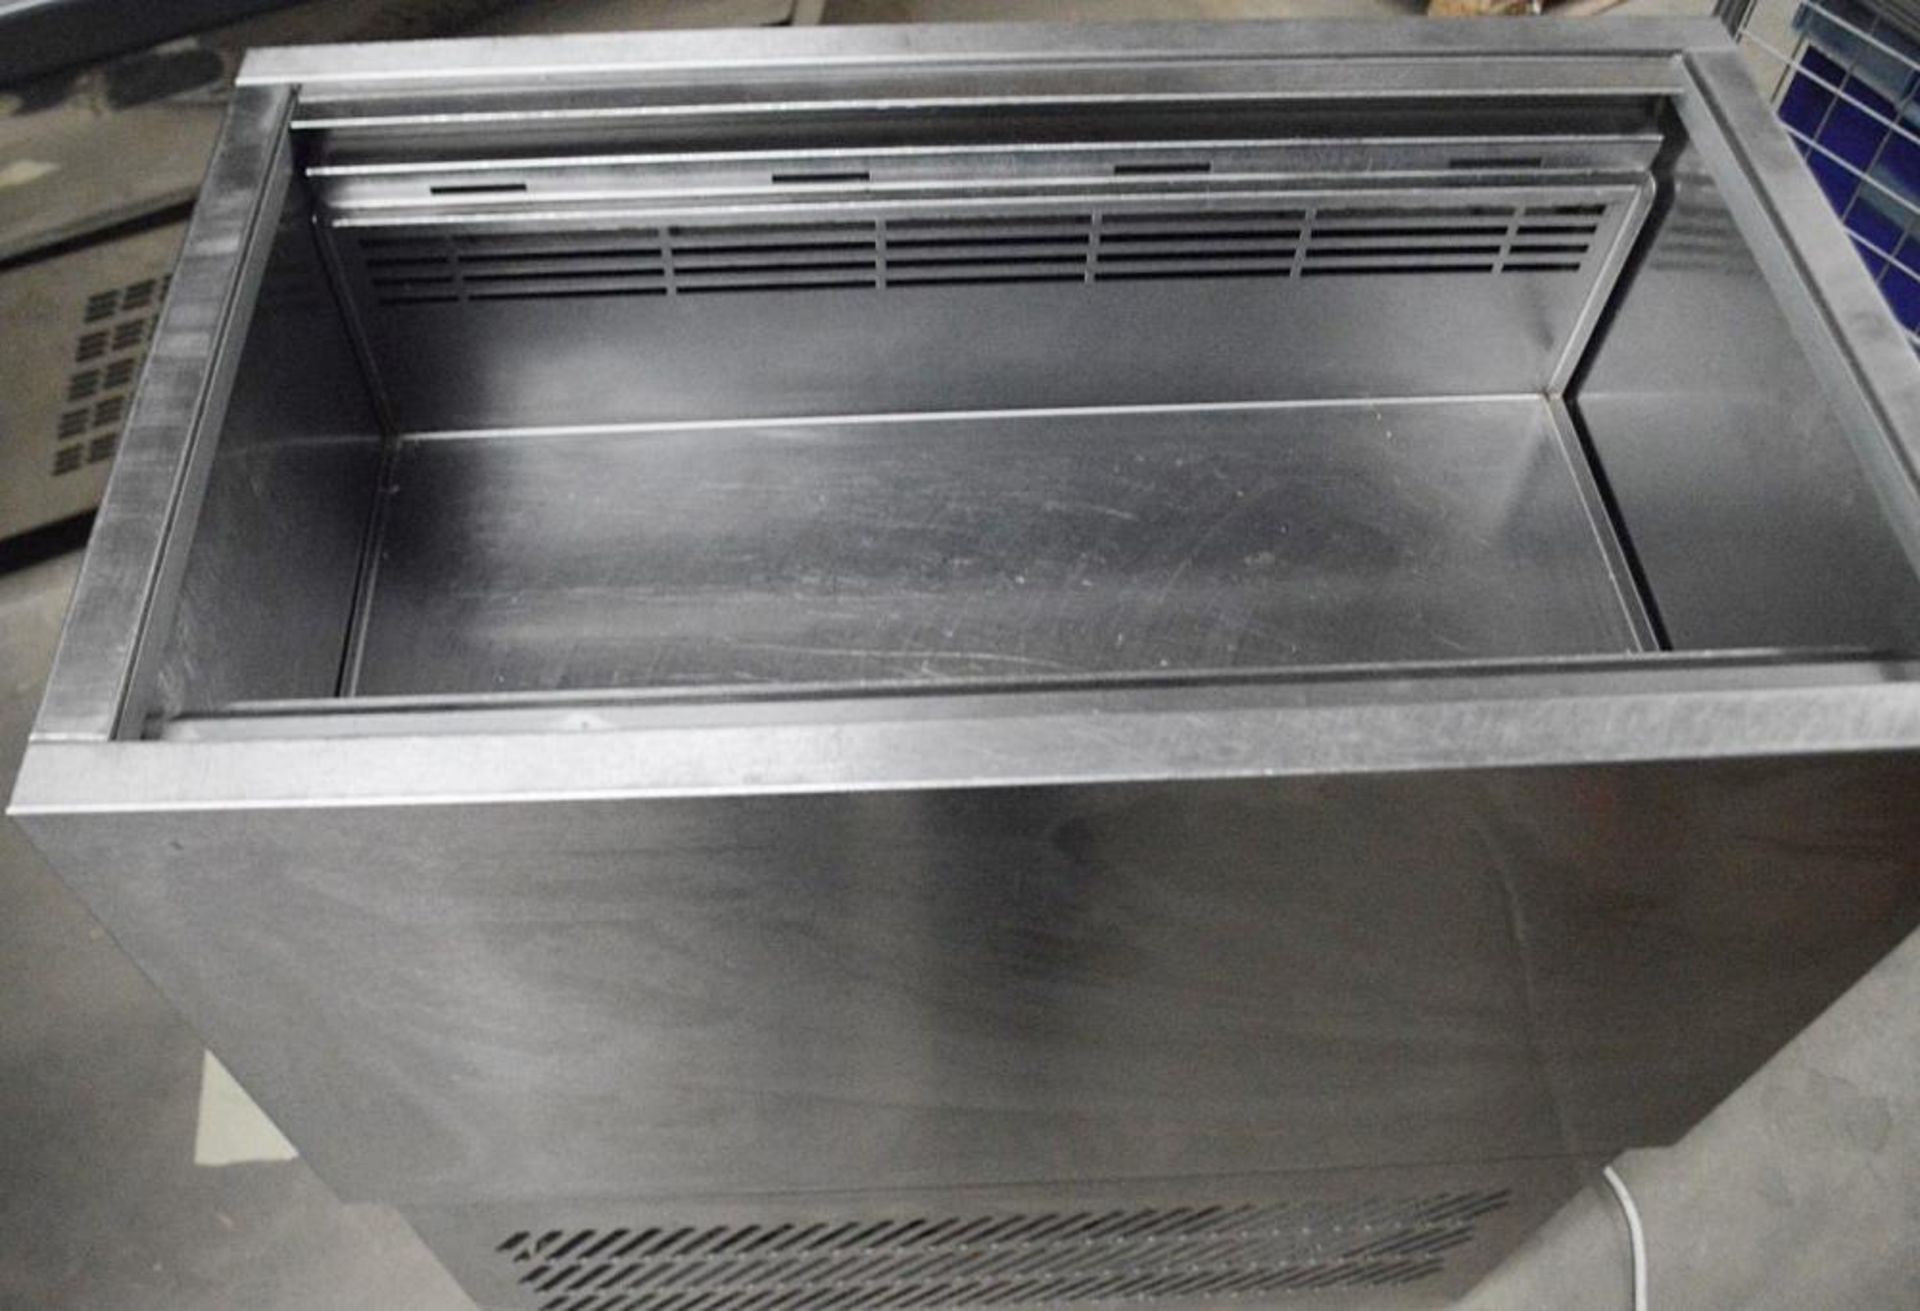 1 x Williams PW4/R290 Refrigerated Prep Well With 4 x Gastro Pans - Dimensions: H88 x W77 x D45cm - - Image 2 of 8